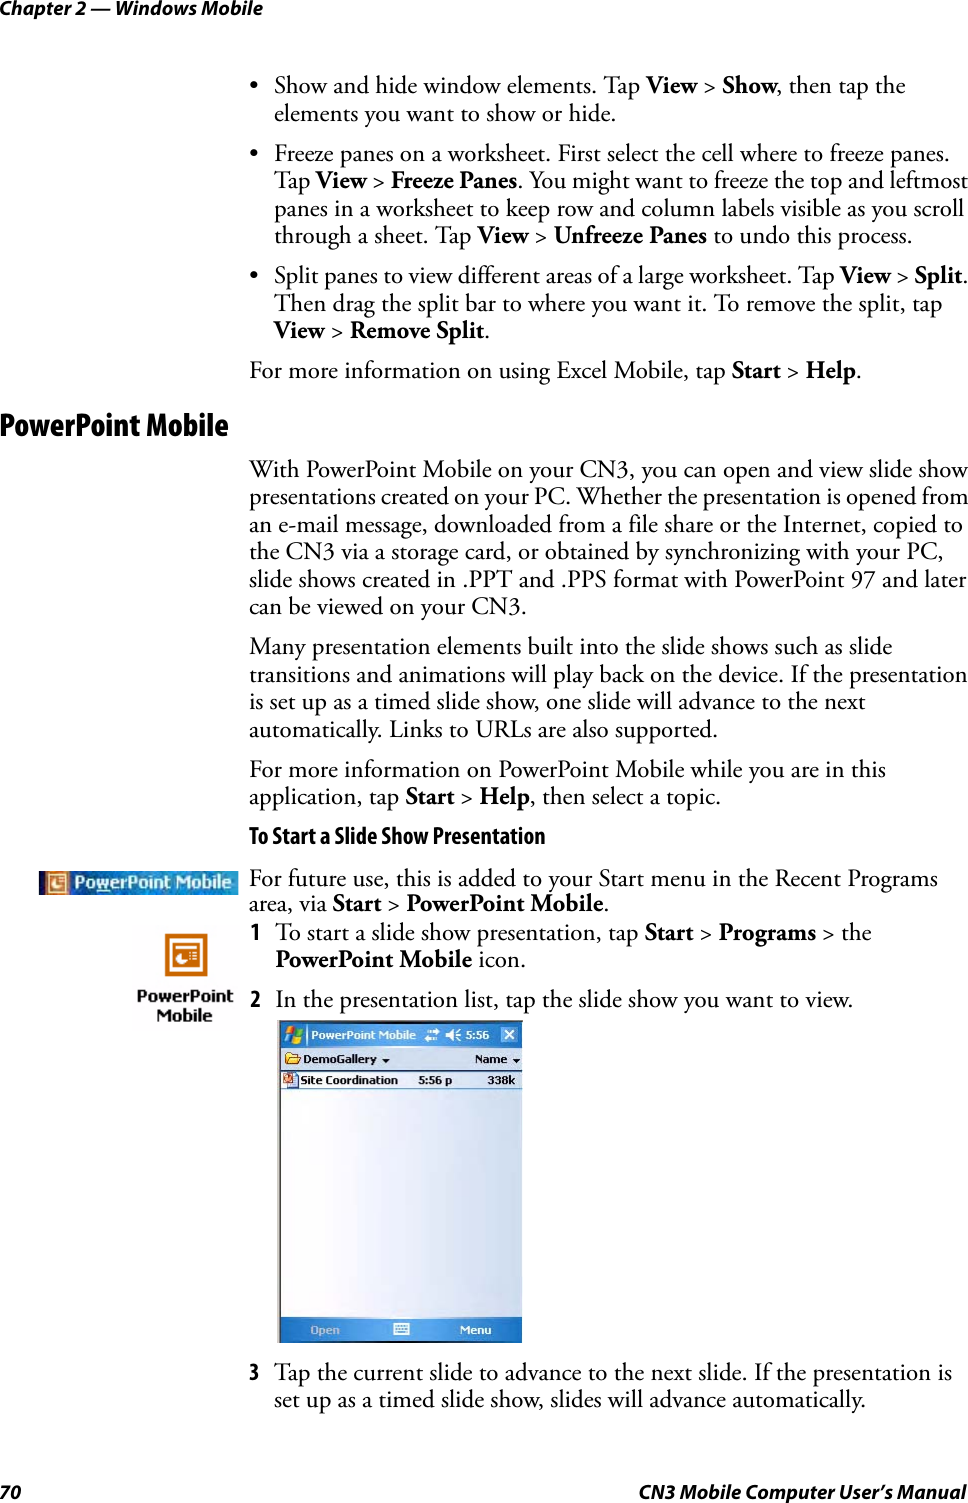 Chapter 2 — Windows Mobile70 CN3 Mobile Computer User’s Manual• Show and hide window elements. Tap View &gt; Show, then tap the elements you want to show or hide.• Freeze panes on a worksheet. First select the cell where to freeze panes. Tap View &gt; Freeze Panes. You might want to freeze the top and leftmost panes in a worksheet to keep row and column labels visible as you scroll through a sheet. Tap View &gt; Unfreeze Panes to undo this process.• Split panes to view different areas of a large worksheet. Tap View &gt; Split. Then drag the split bar to where you want it. To remove the split, tap View &gt; Remove Split.For more information on using Excel Mobile, tap Start &gt; Help.PowerPoint MobileWith PowerPoint Mobile on your CN3, you can open and view slide show presentations created on your PC. Whether the presentation is opened from an e-mail message, downloaded from a file share or the Internet, copied to the CN3 via a storage card, or obtained by synchronizing with your PC, slide shows created in .PPT and .PPS format with PowerPoint 97 and later can be viewed on your CN3.Many presentation elements built into the slide shows such as slide transitions and animations will play back on the device. If the presentation is set up as a timed slide show, one slide will advance to the next automatically. Links to URLs are also supported.For more information on PowerPoint Mobile while you are in this application, tap Start &gt; Help, then select a topic.To Start a Slide Show Presentation3Tap the current slide to advance to the next slide. If the presentation is set up as a timed slide show, slides will advance automatically.For future use, this is added to your Start menu in the Recent Programs area, via Start &gt; PowerPoint Mobile.1To start a slide show presentation, tap Start &gt; Programs &gt; the PowerPoint Mobile icon.2In the presentation list, tap the slide show you want to view.